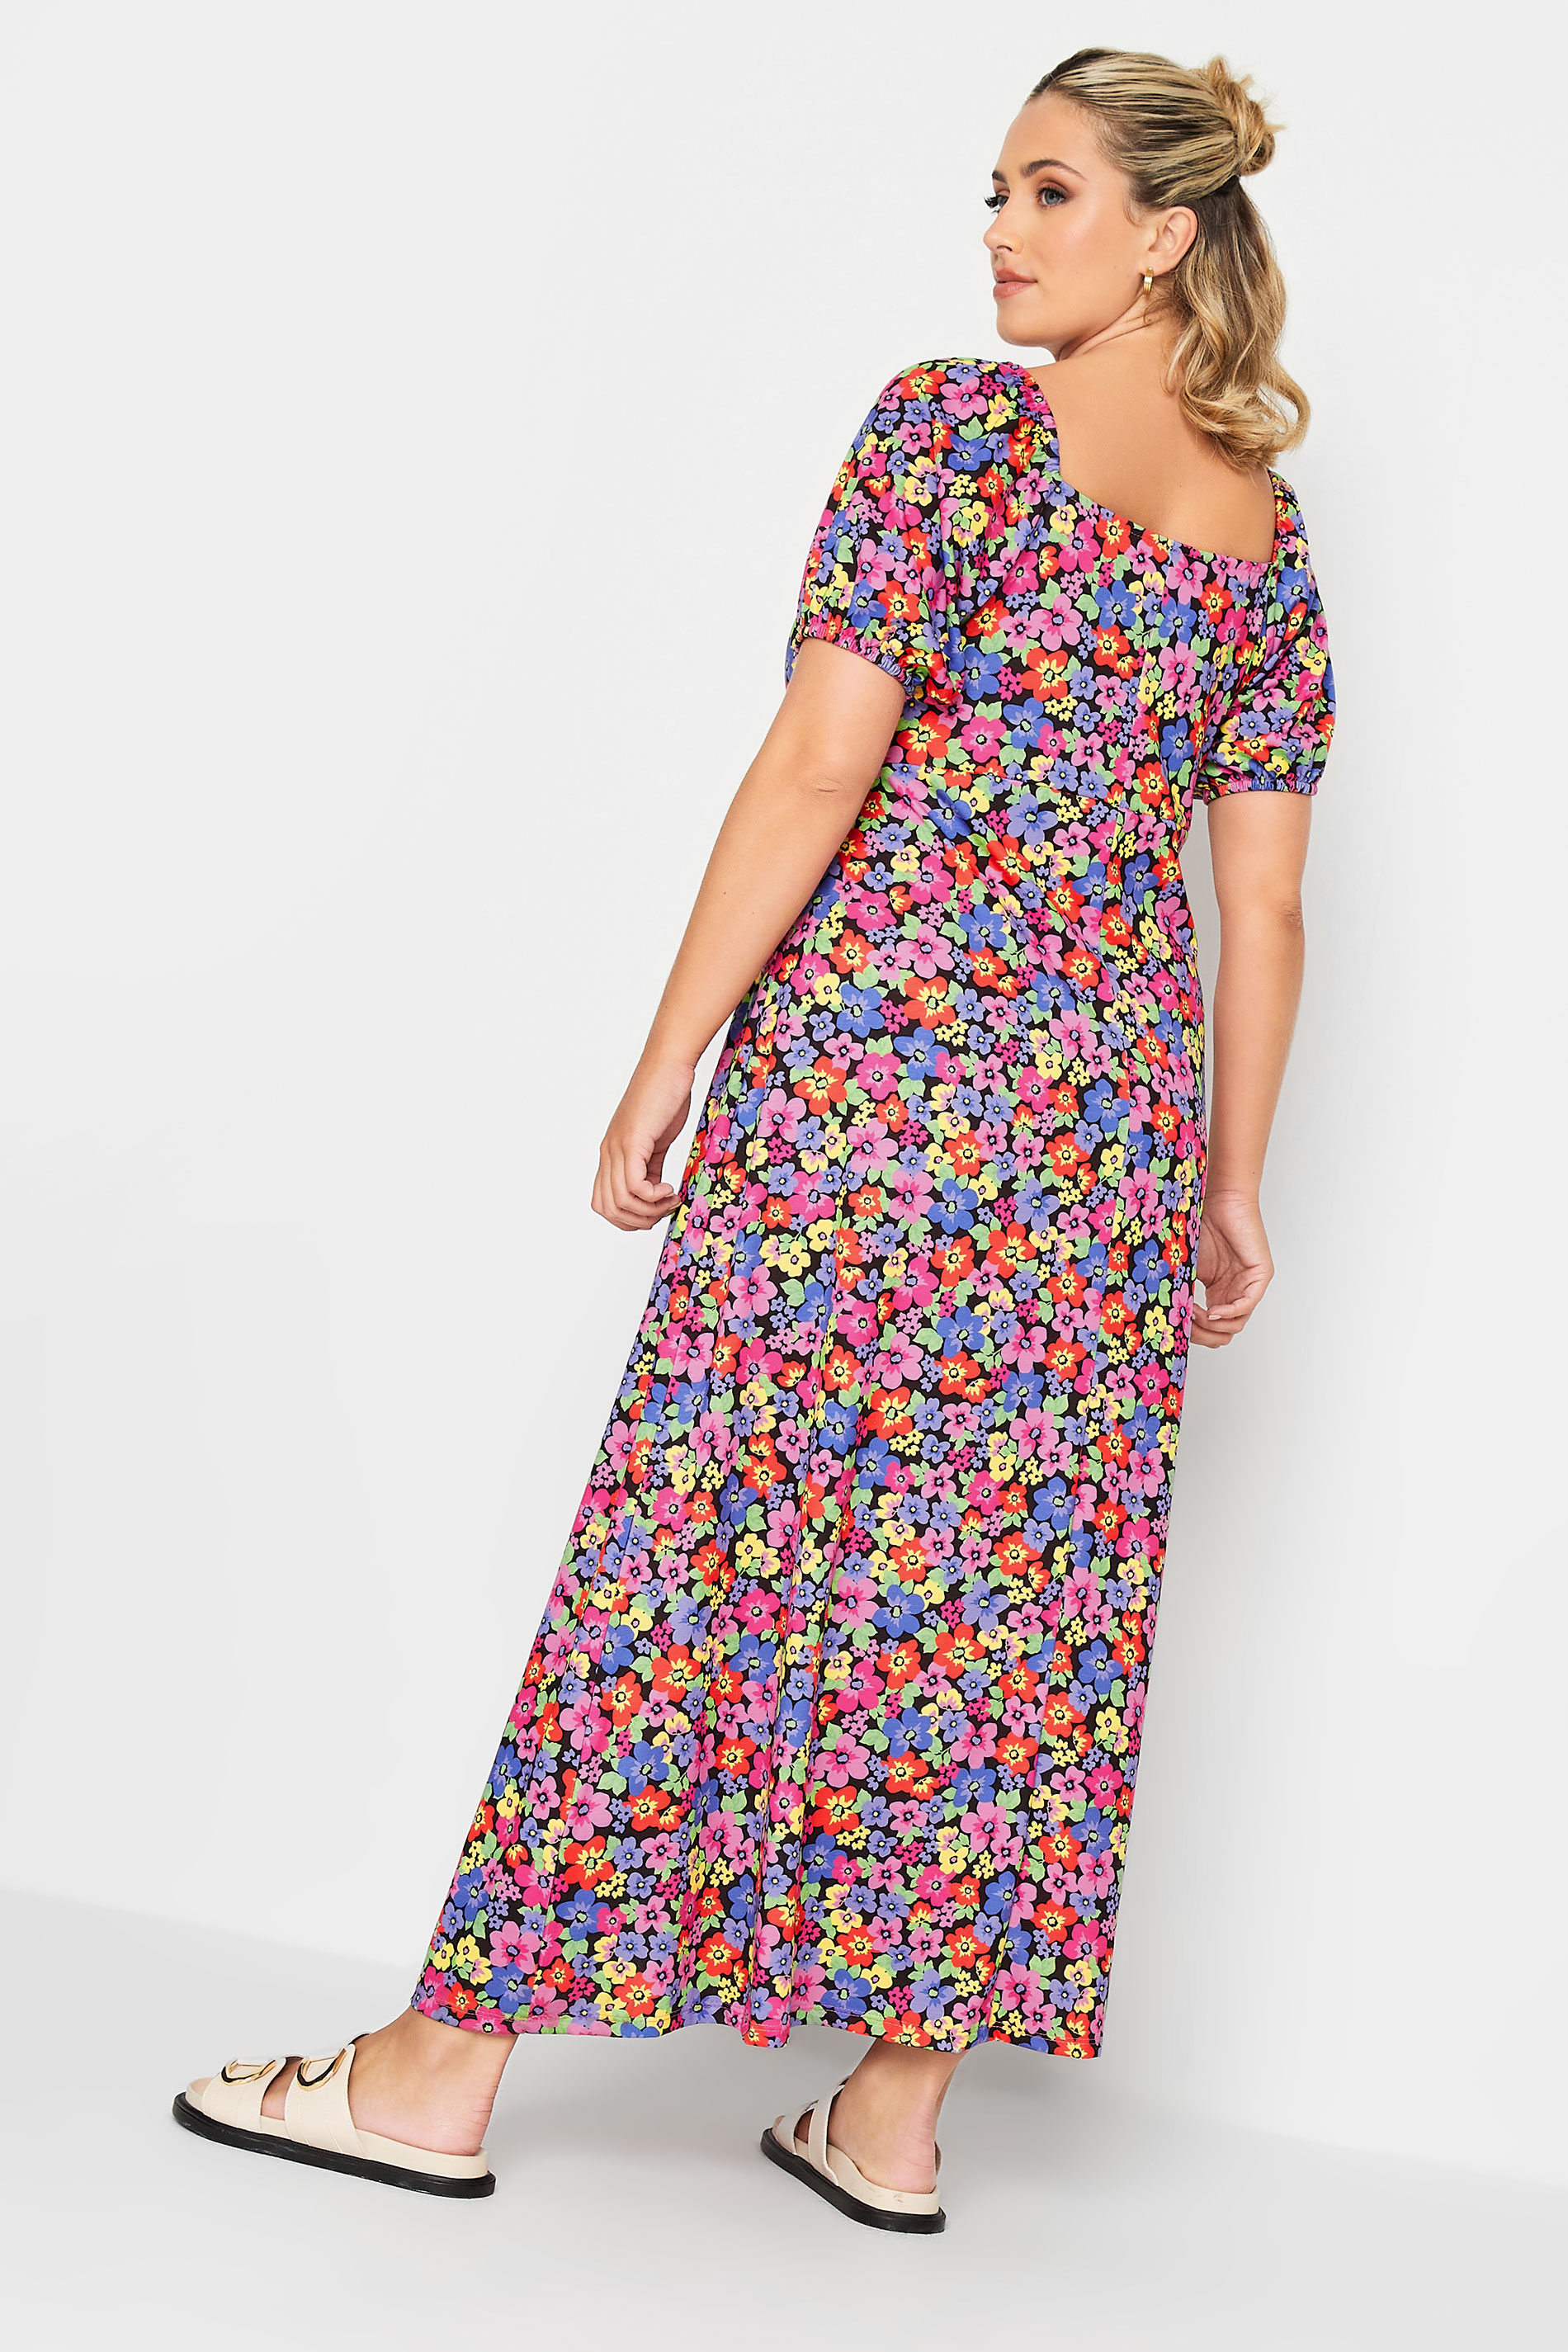 LIMITED COLLECTION Plus Size Black & Pink Floral Wrap Maxi Dress | Yours Clothing  3